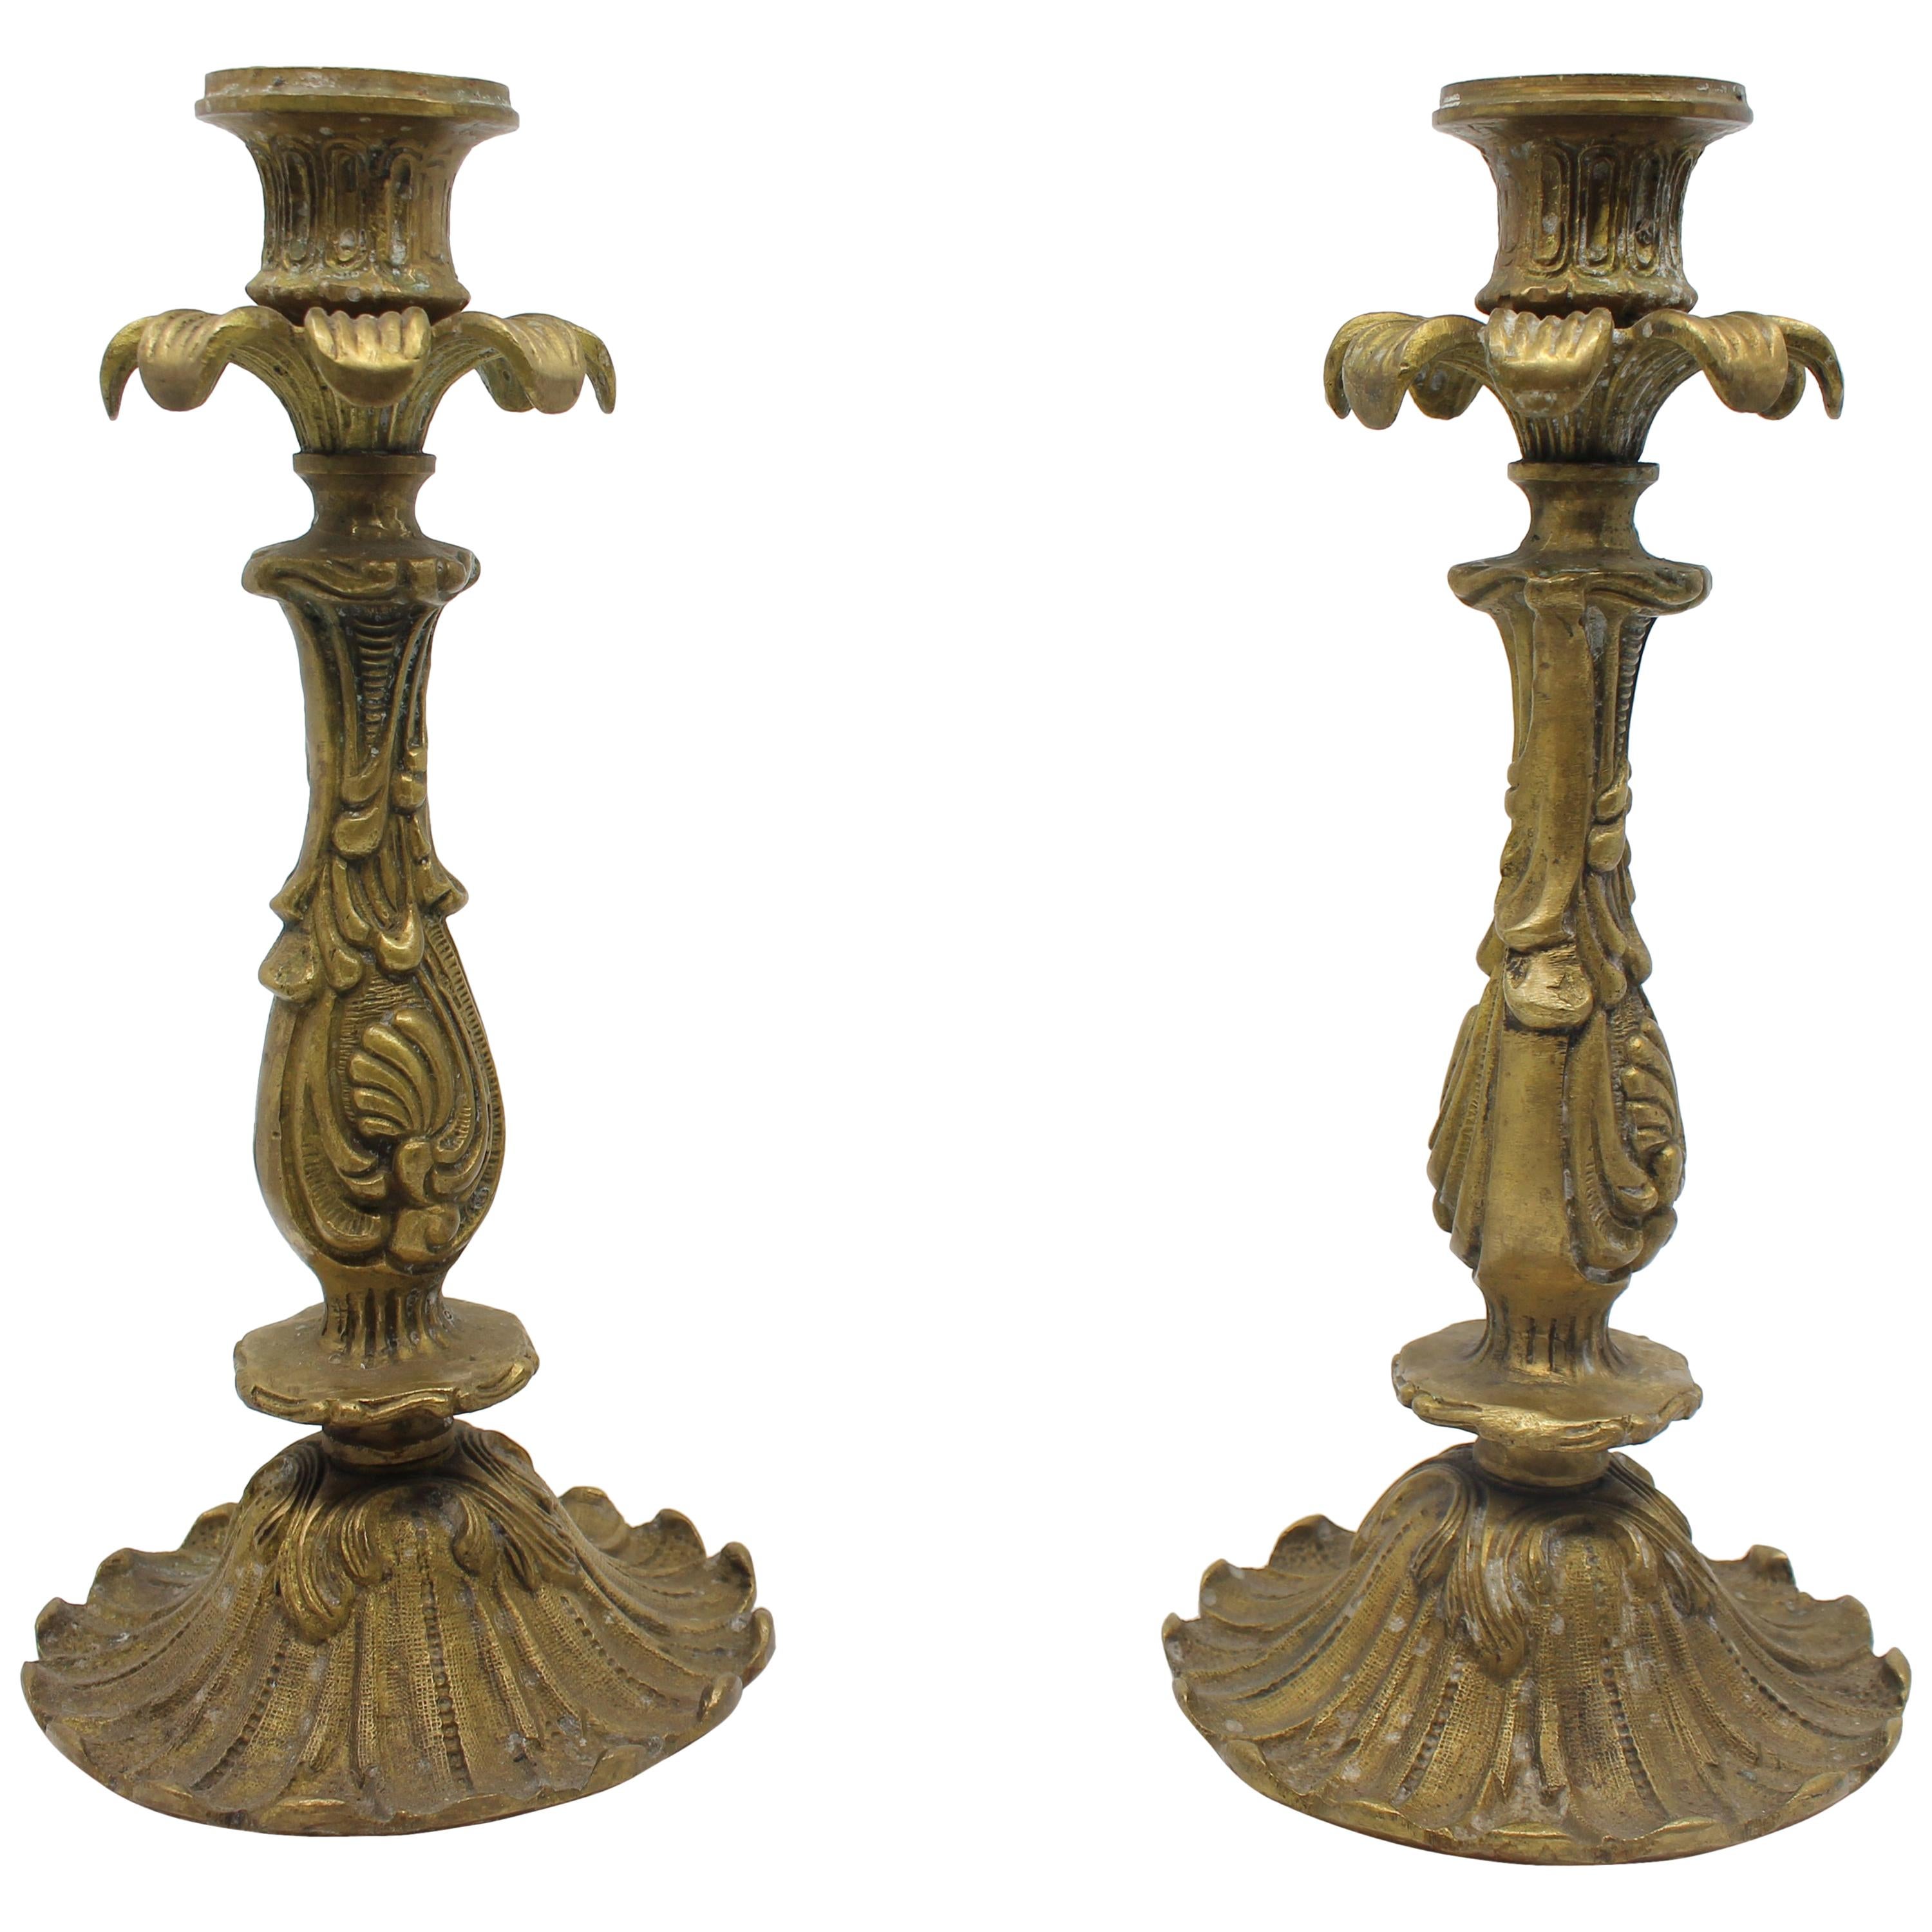 Pair of Heavy Vintage Decorative Brass Candlesticks For Sale